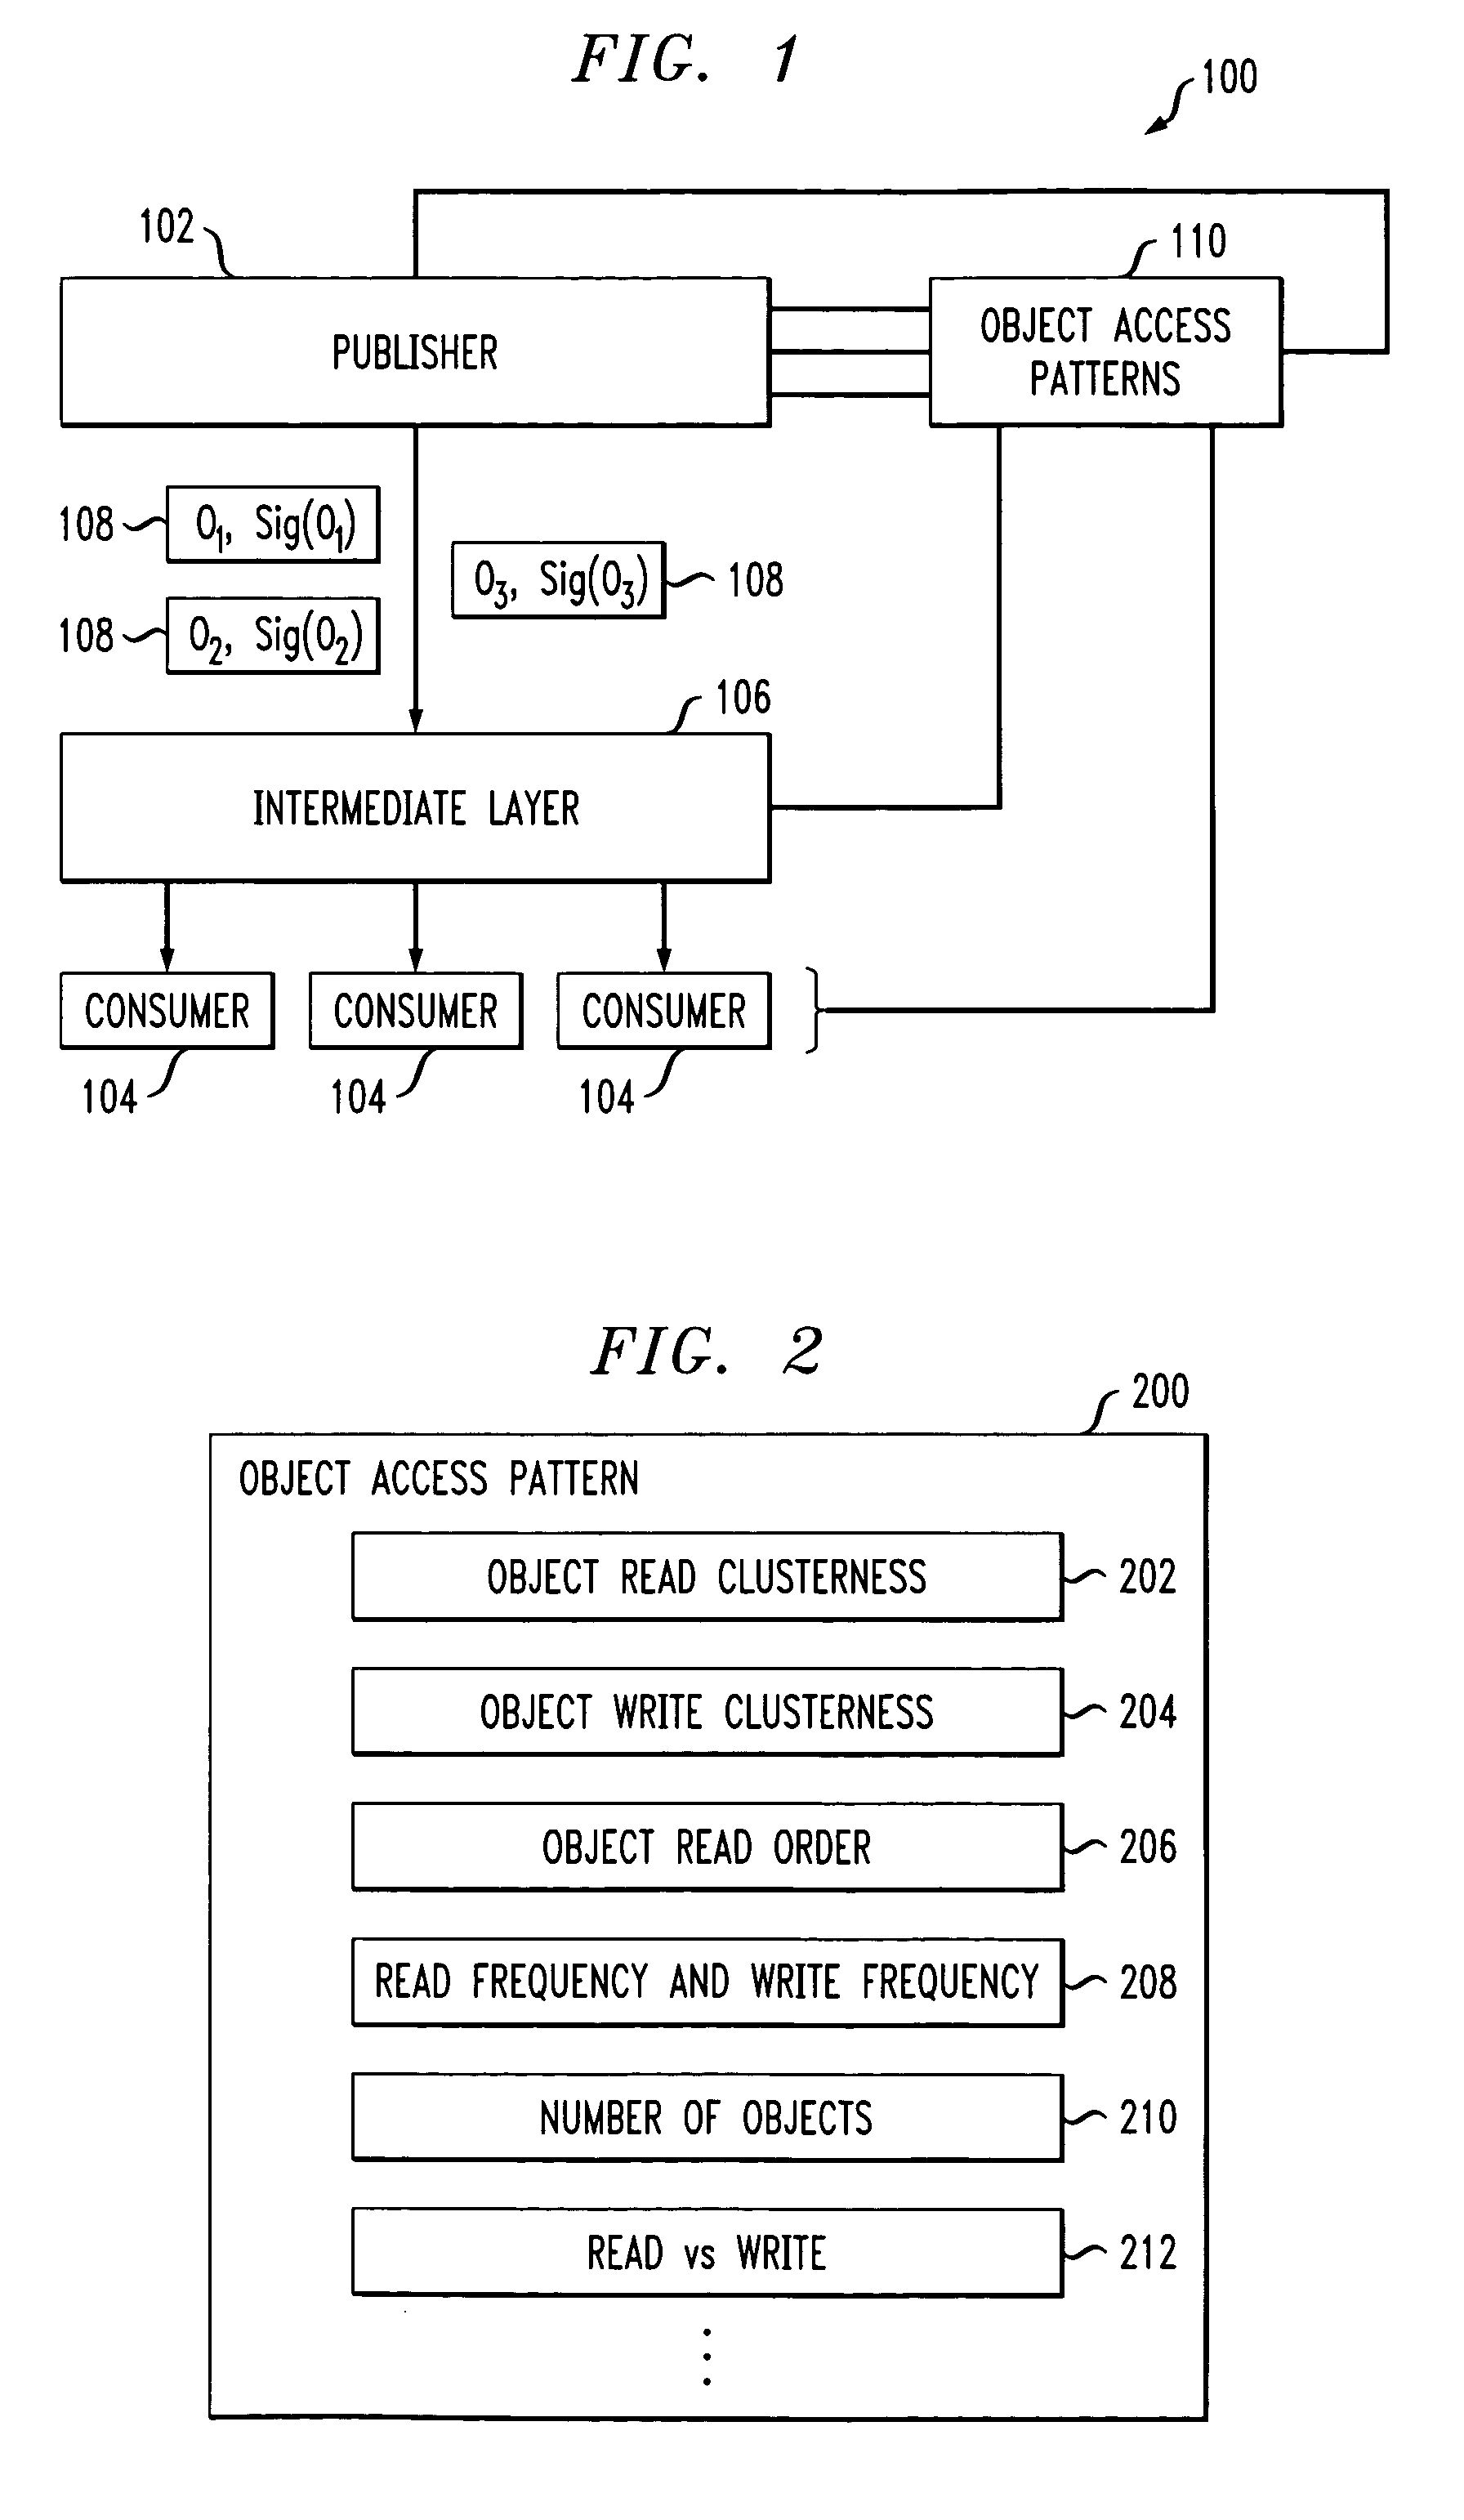 Methods for efficiently authenticating multiple objects based on access patterns